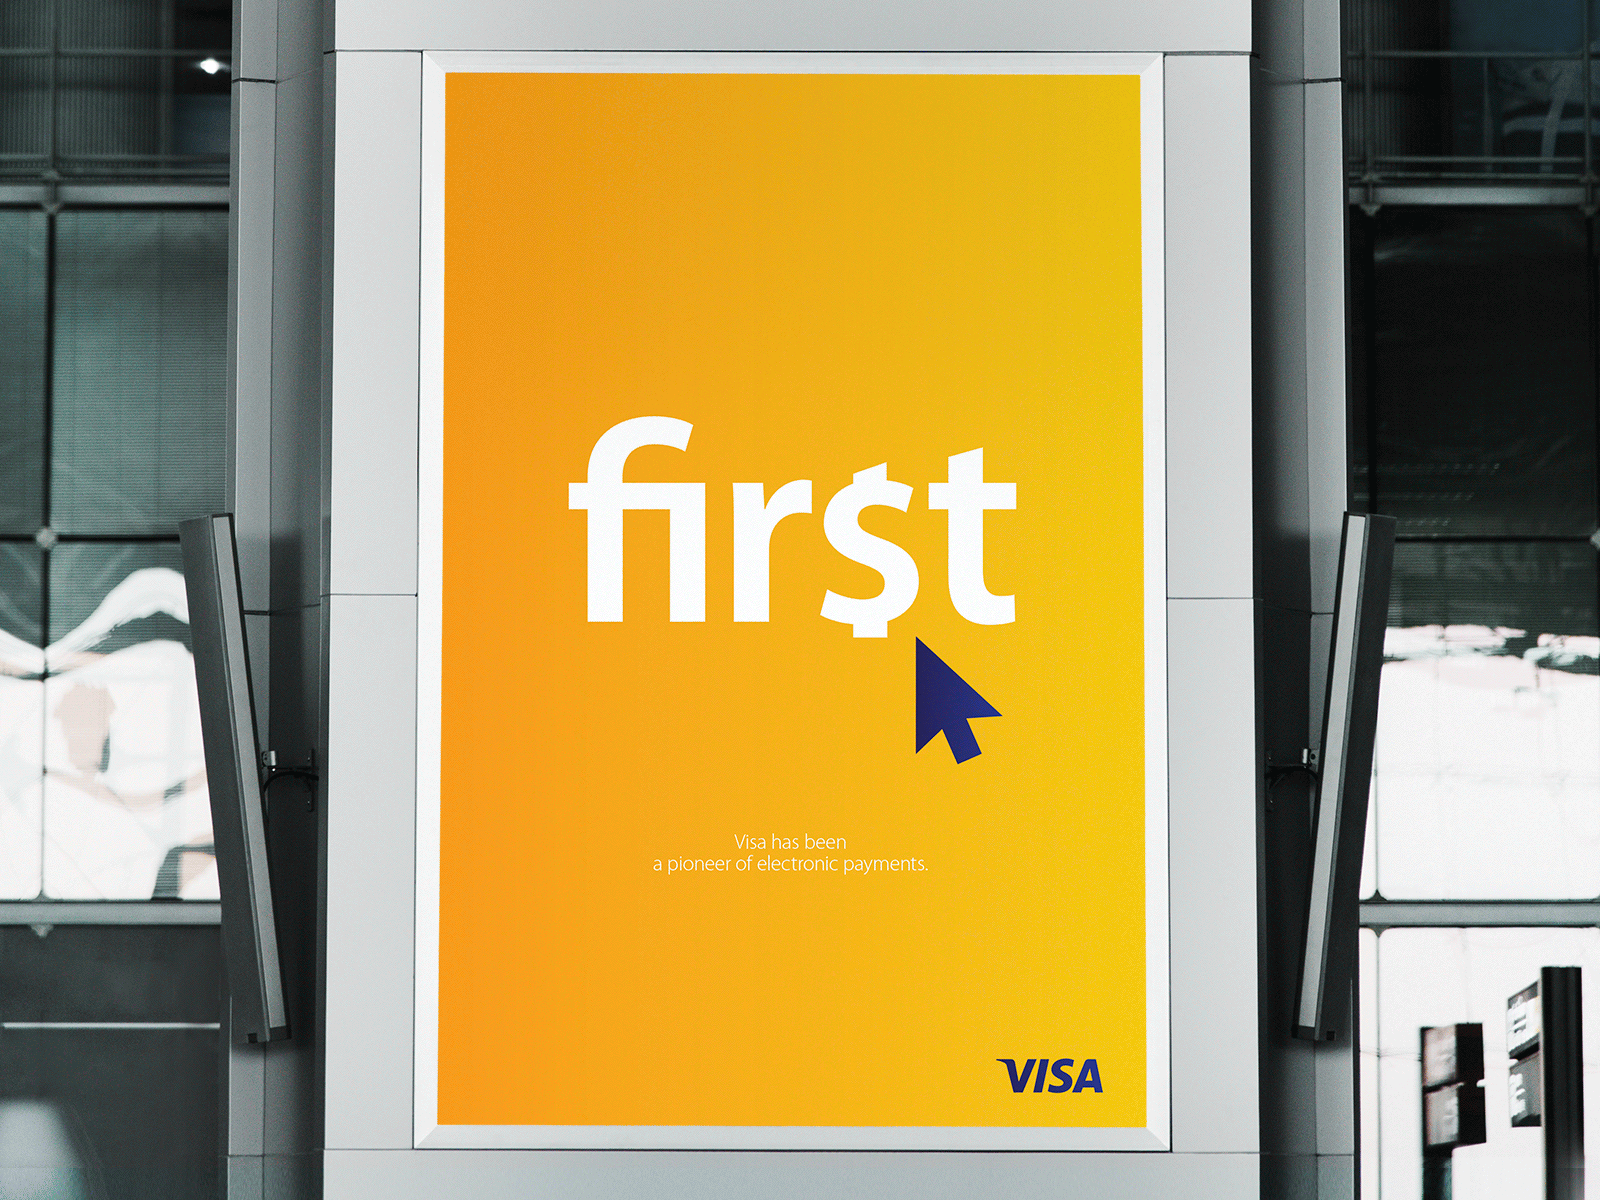 Visa Image Posters by Kostey on Dribbble